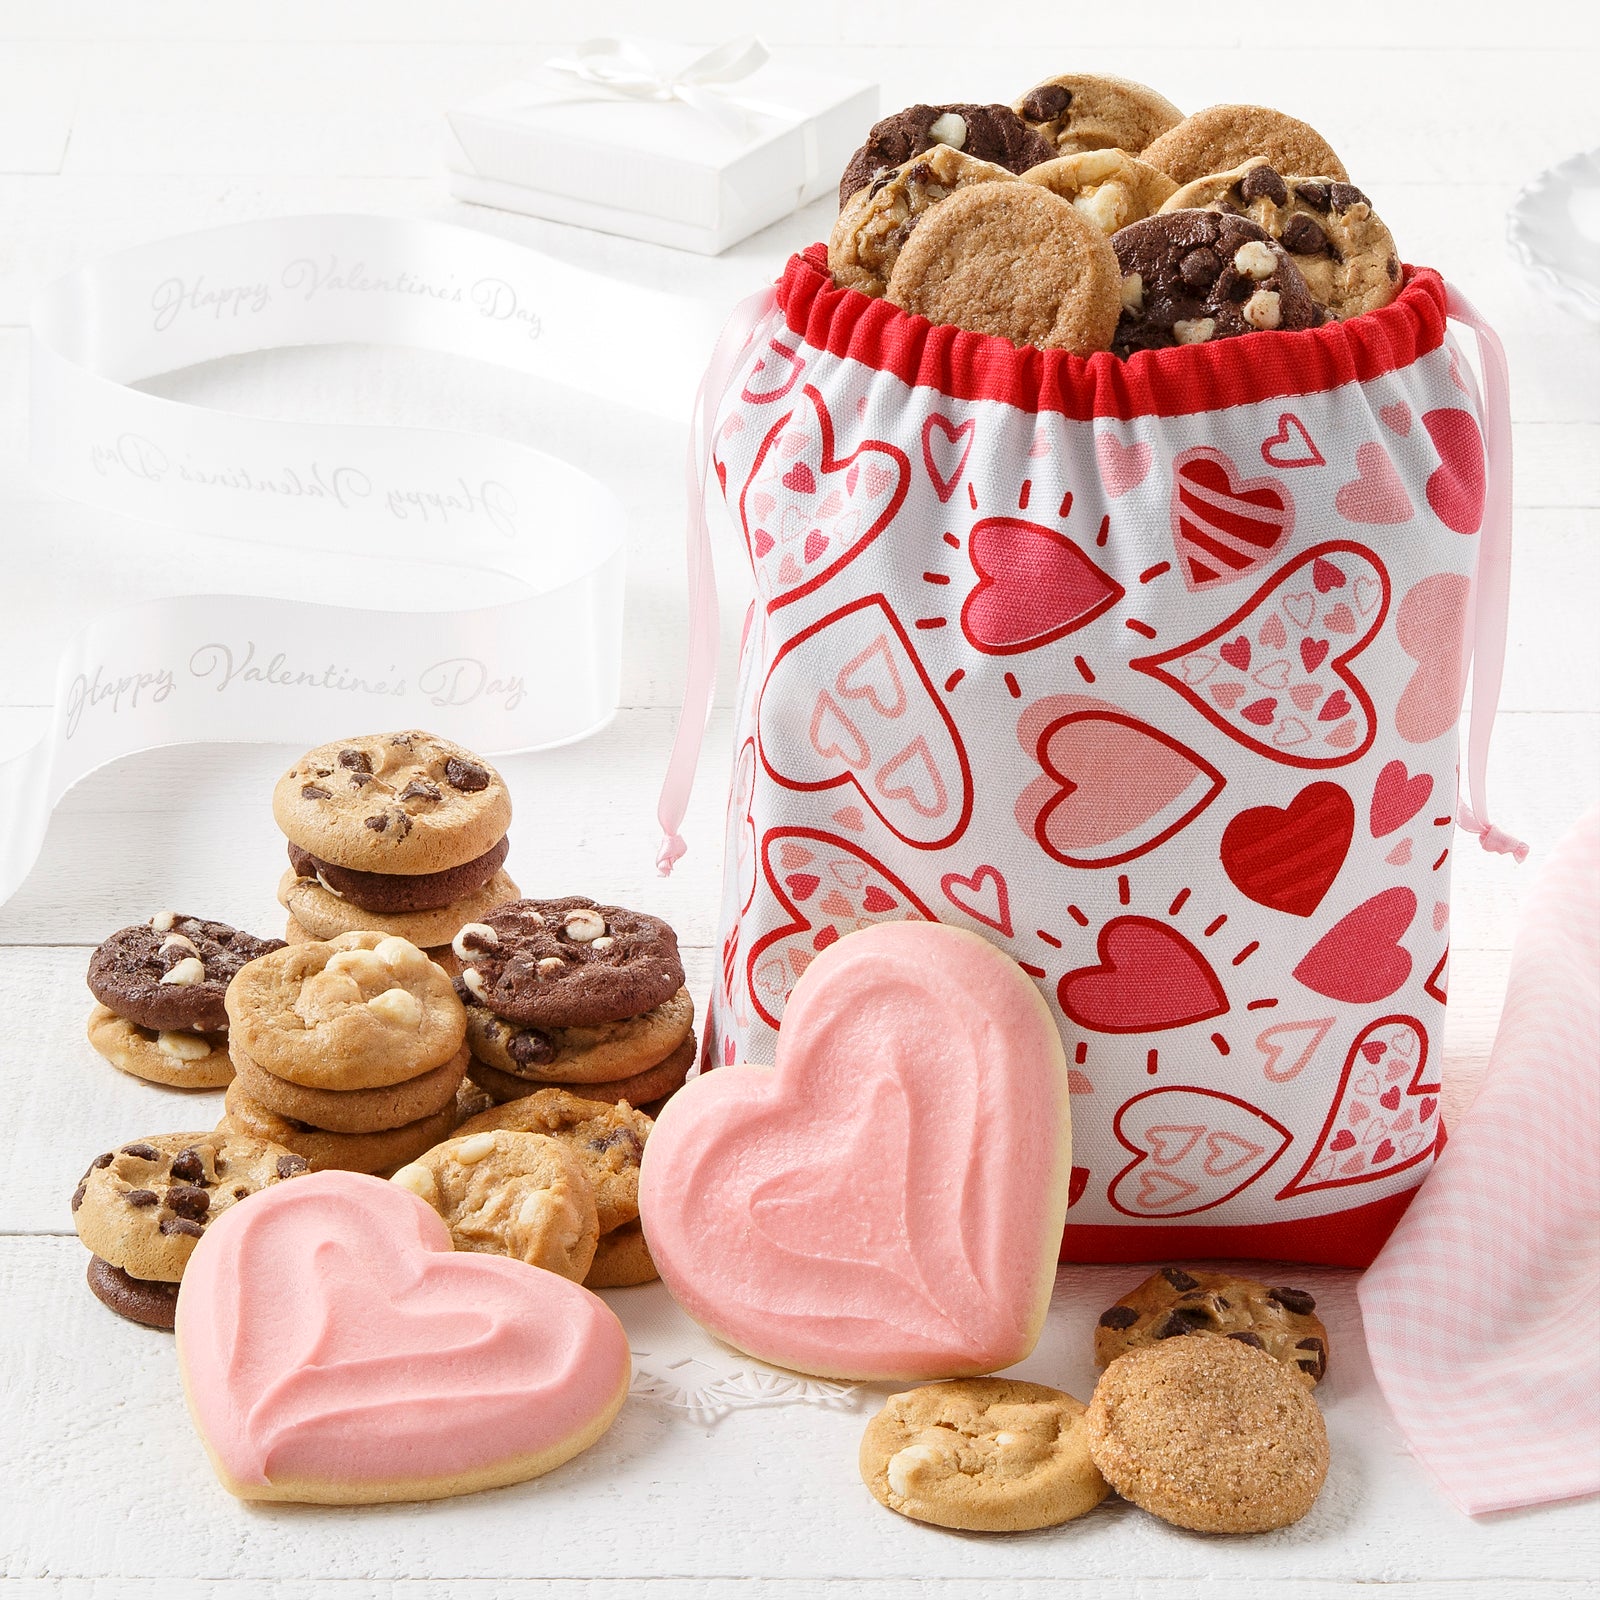 A heart tote filled with nibblers and two frosted heart cookies